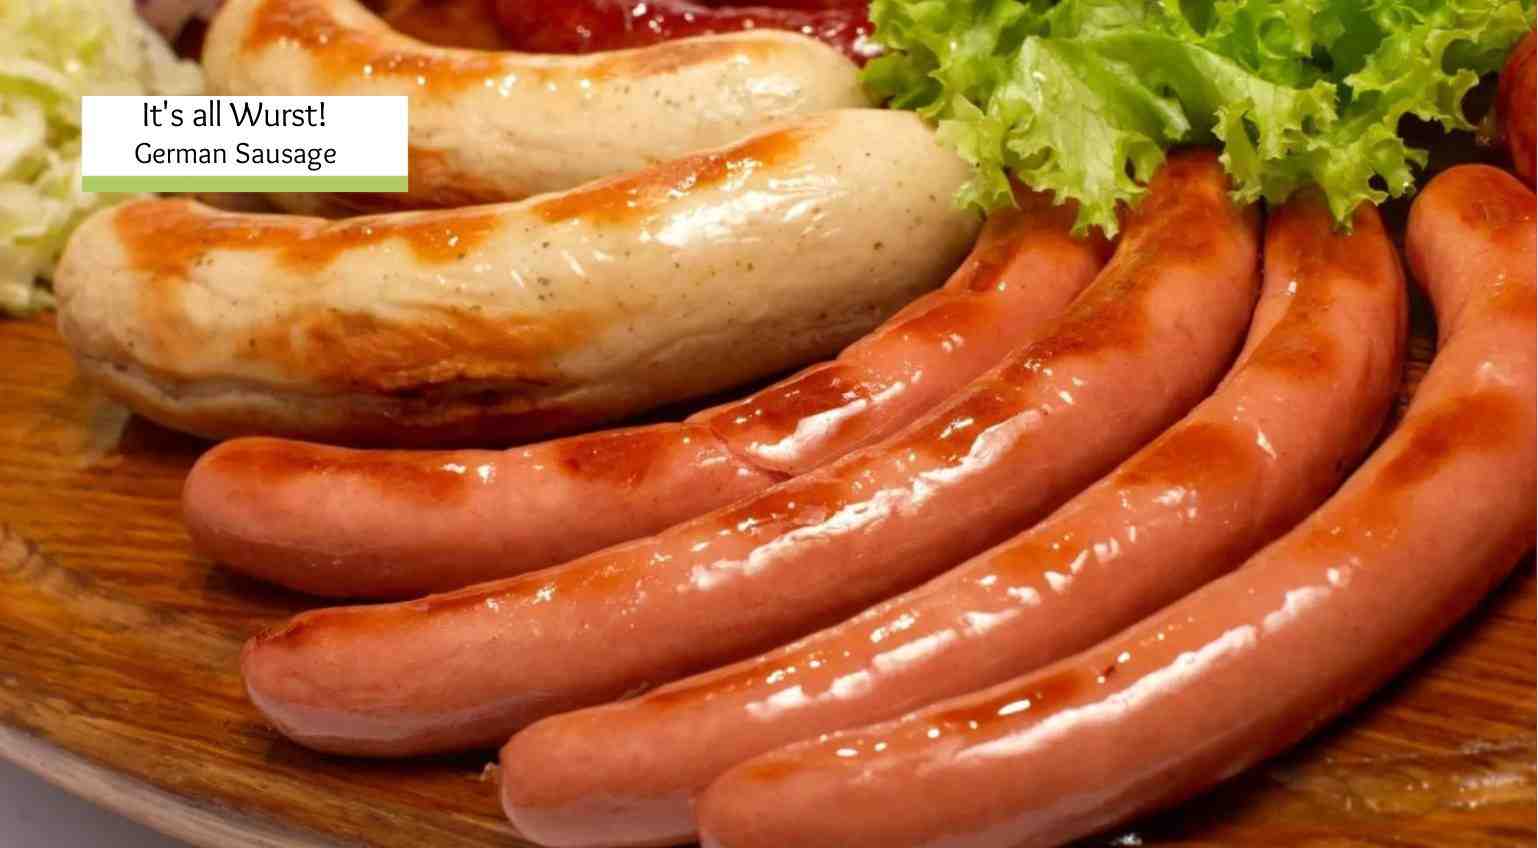 What is the best German sausage?